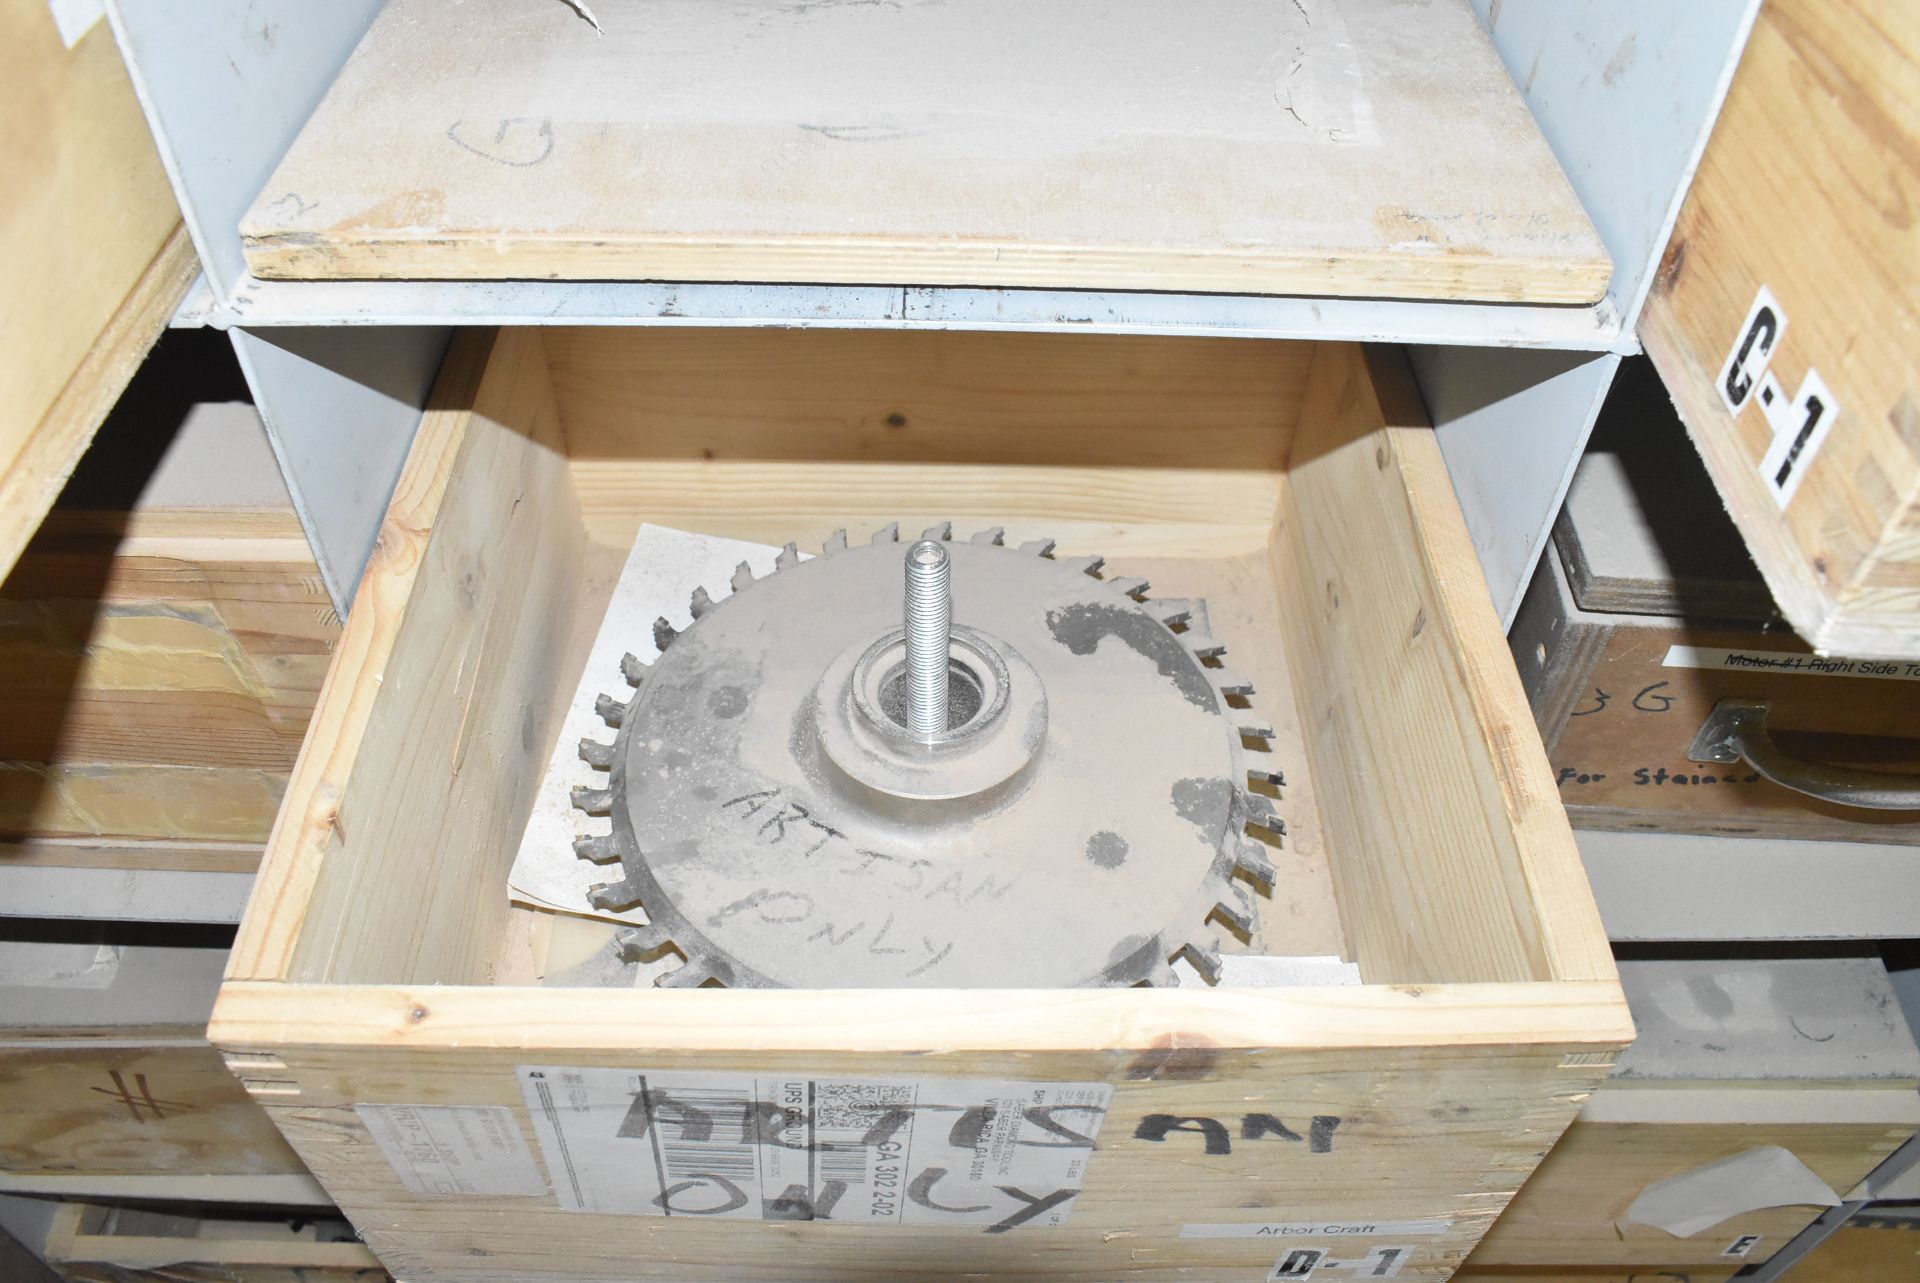 LOT/ HOMAG DOUBLE END TENONER TOOLING [RIGGING FEE FOR LOT #182 - $300 USD PLUS APPLICABLE FEES] - Image 4 of 14